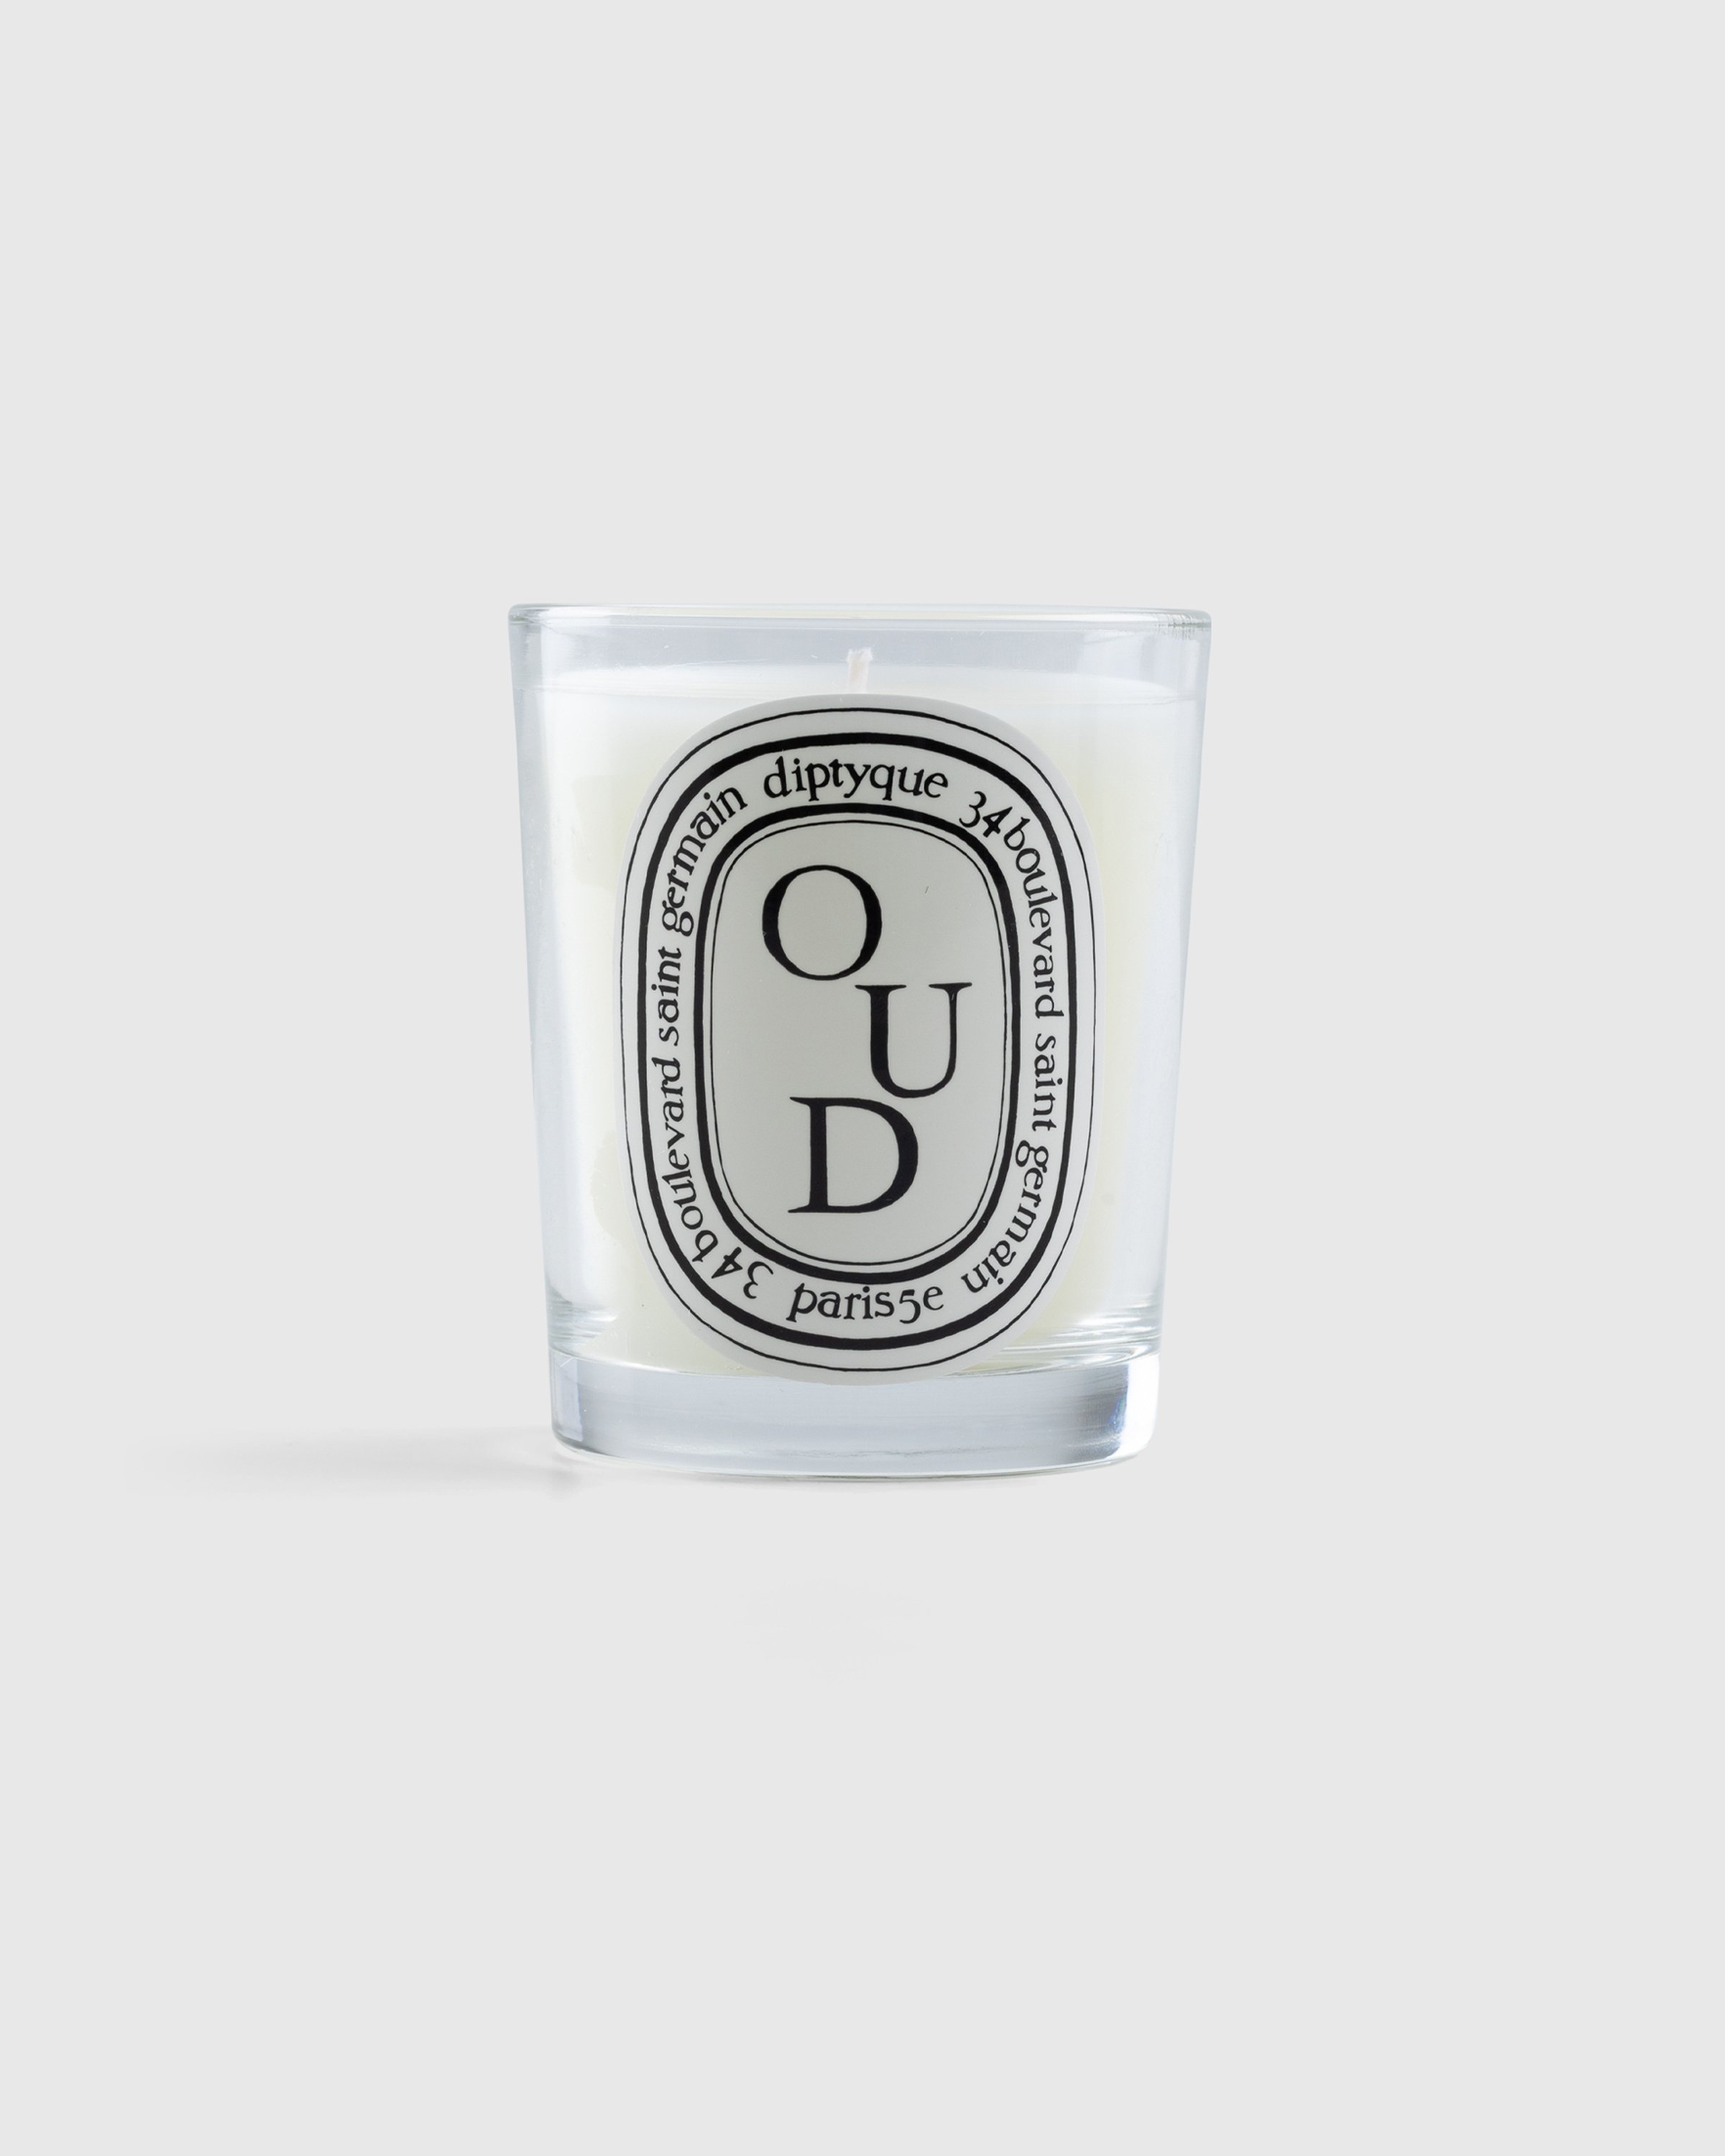 Diptyque – Standard Candle Oud 190g - Candles - White - Image 1